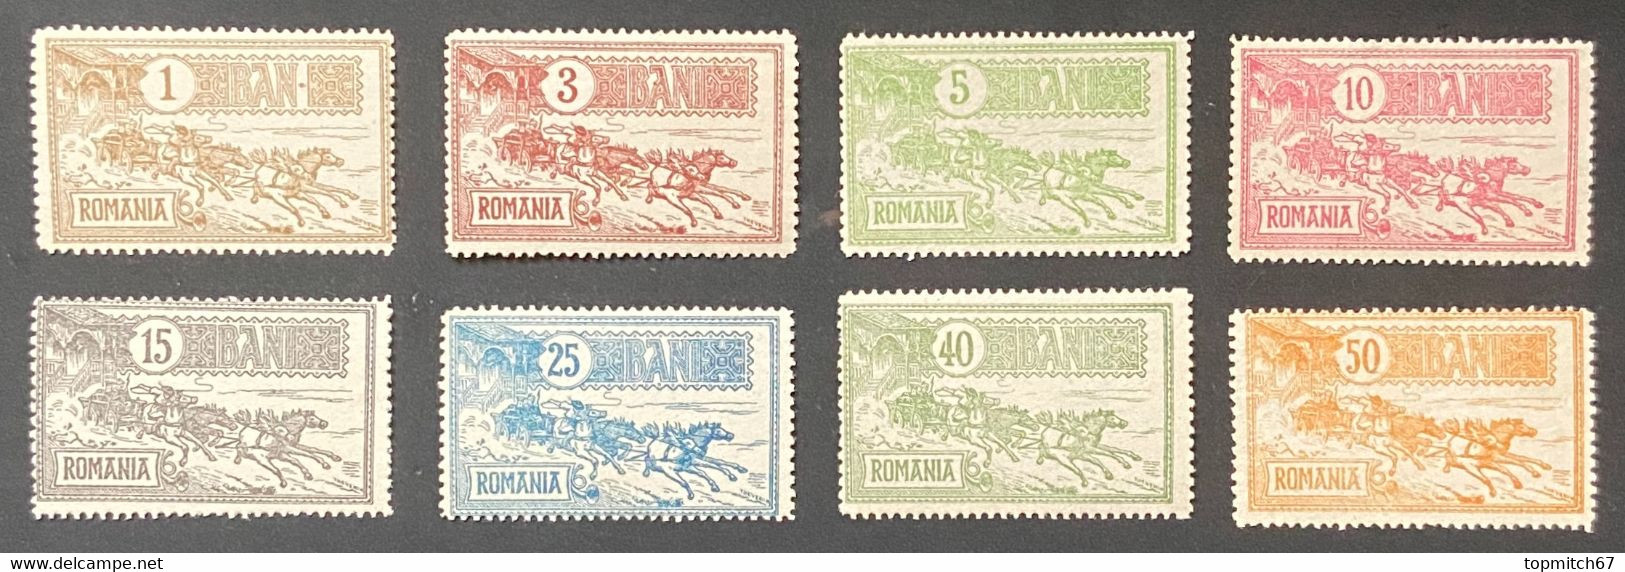 ROM0137-44MNH - Mail Coach - Complete Set Of 8 MNH Stamps - Romania - 1903 - Nuovi